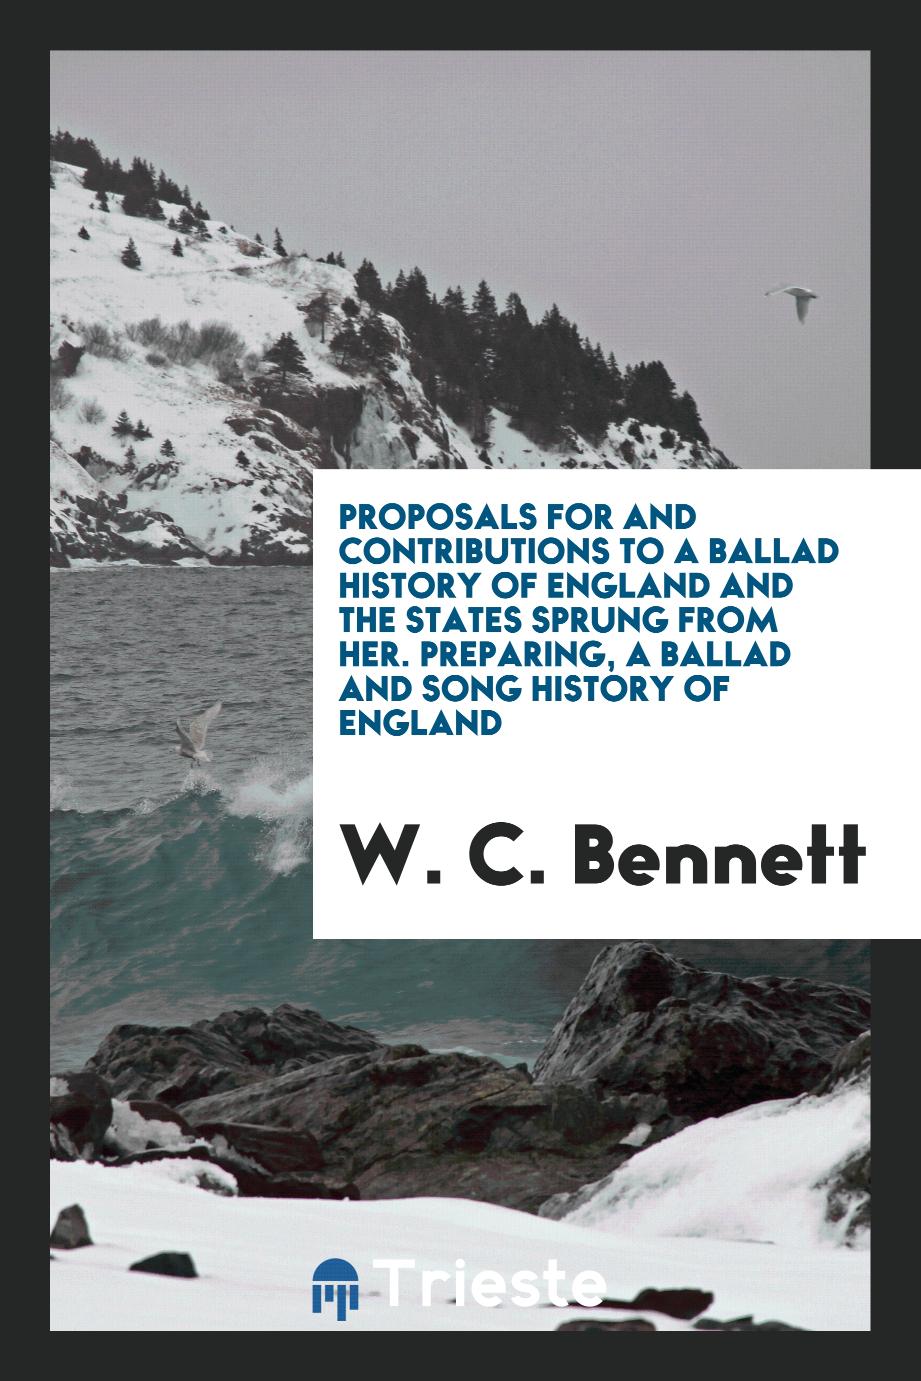 Proposals for and Contributions to a Ballad History of England and the States Sprung from Her. Preparing, a Ballad and Song History of England